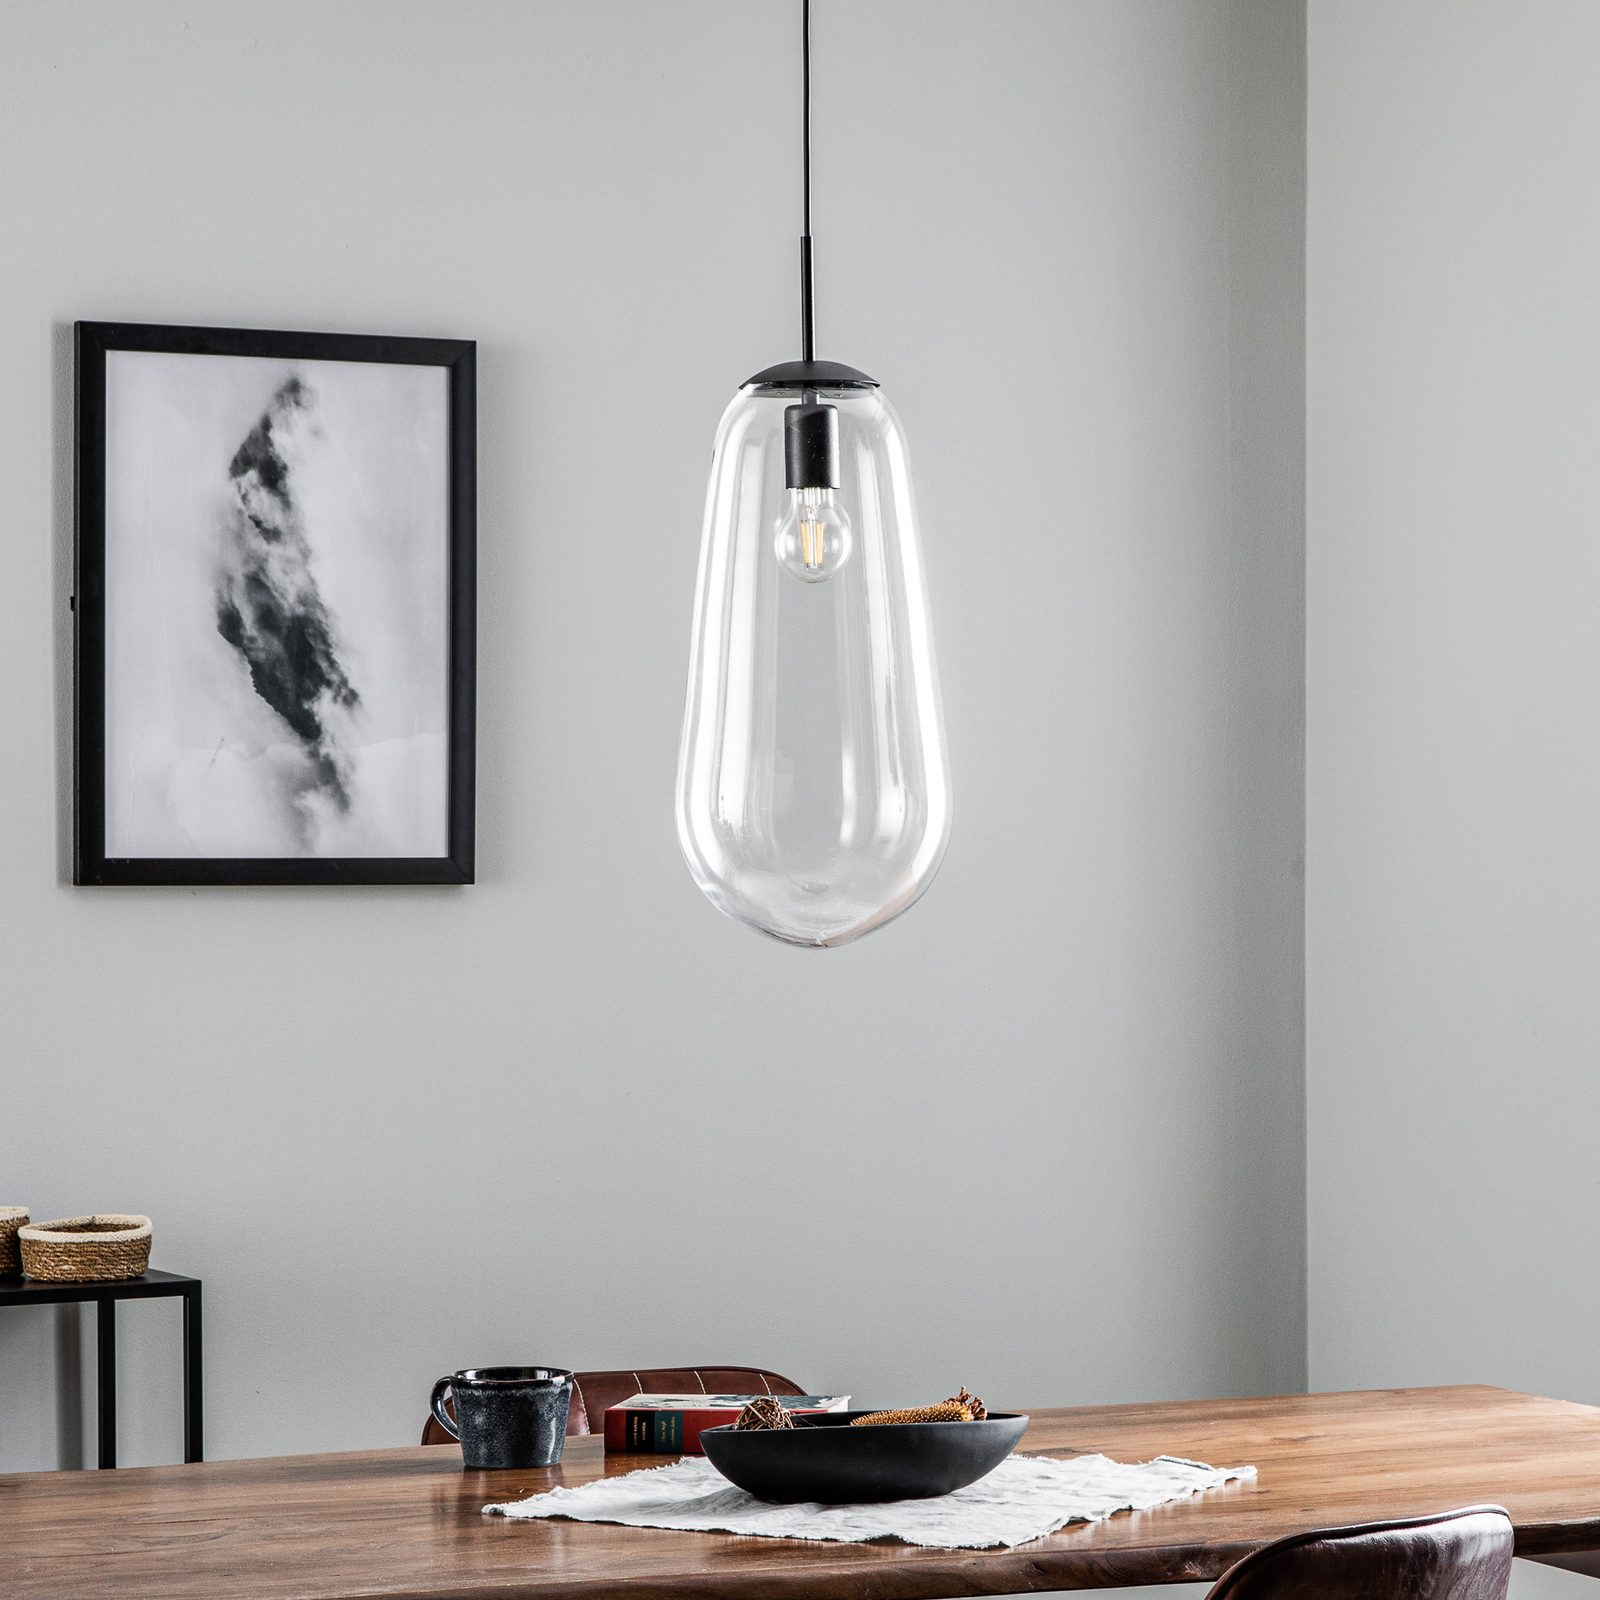 Pear L pendant light with glass shade, black